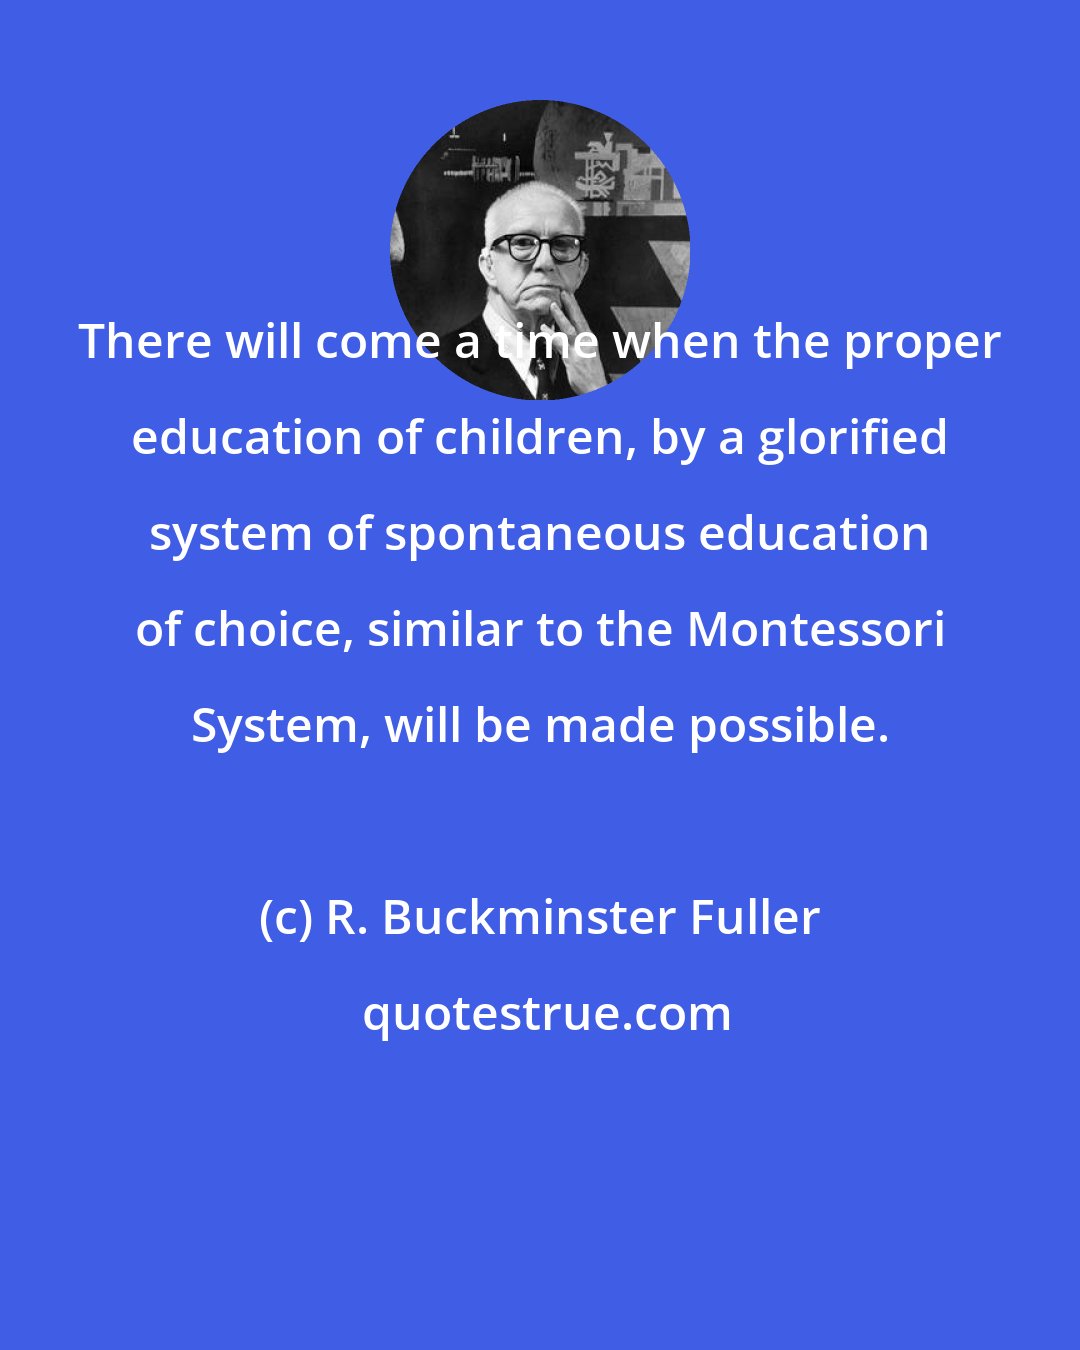 R. Buckminster Fuller: There will come a time when the proper education of children, by a glorified system of spontaneous education of choice, similar to the Montessori System, will be made possible.